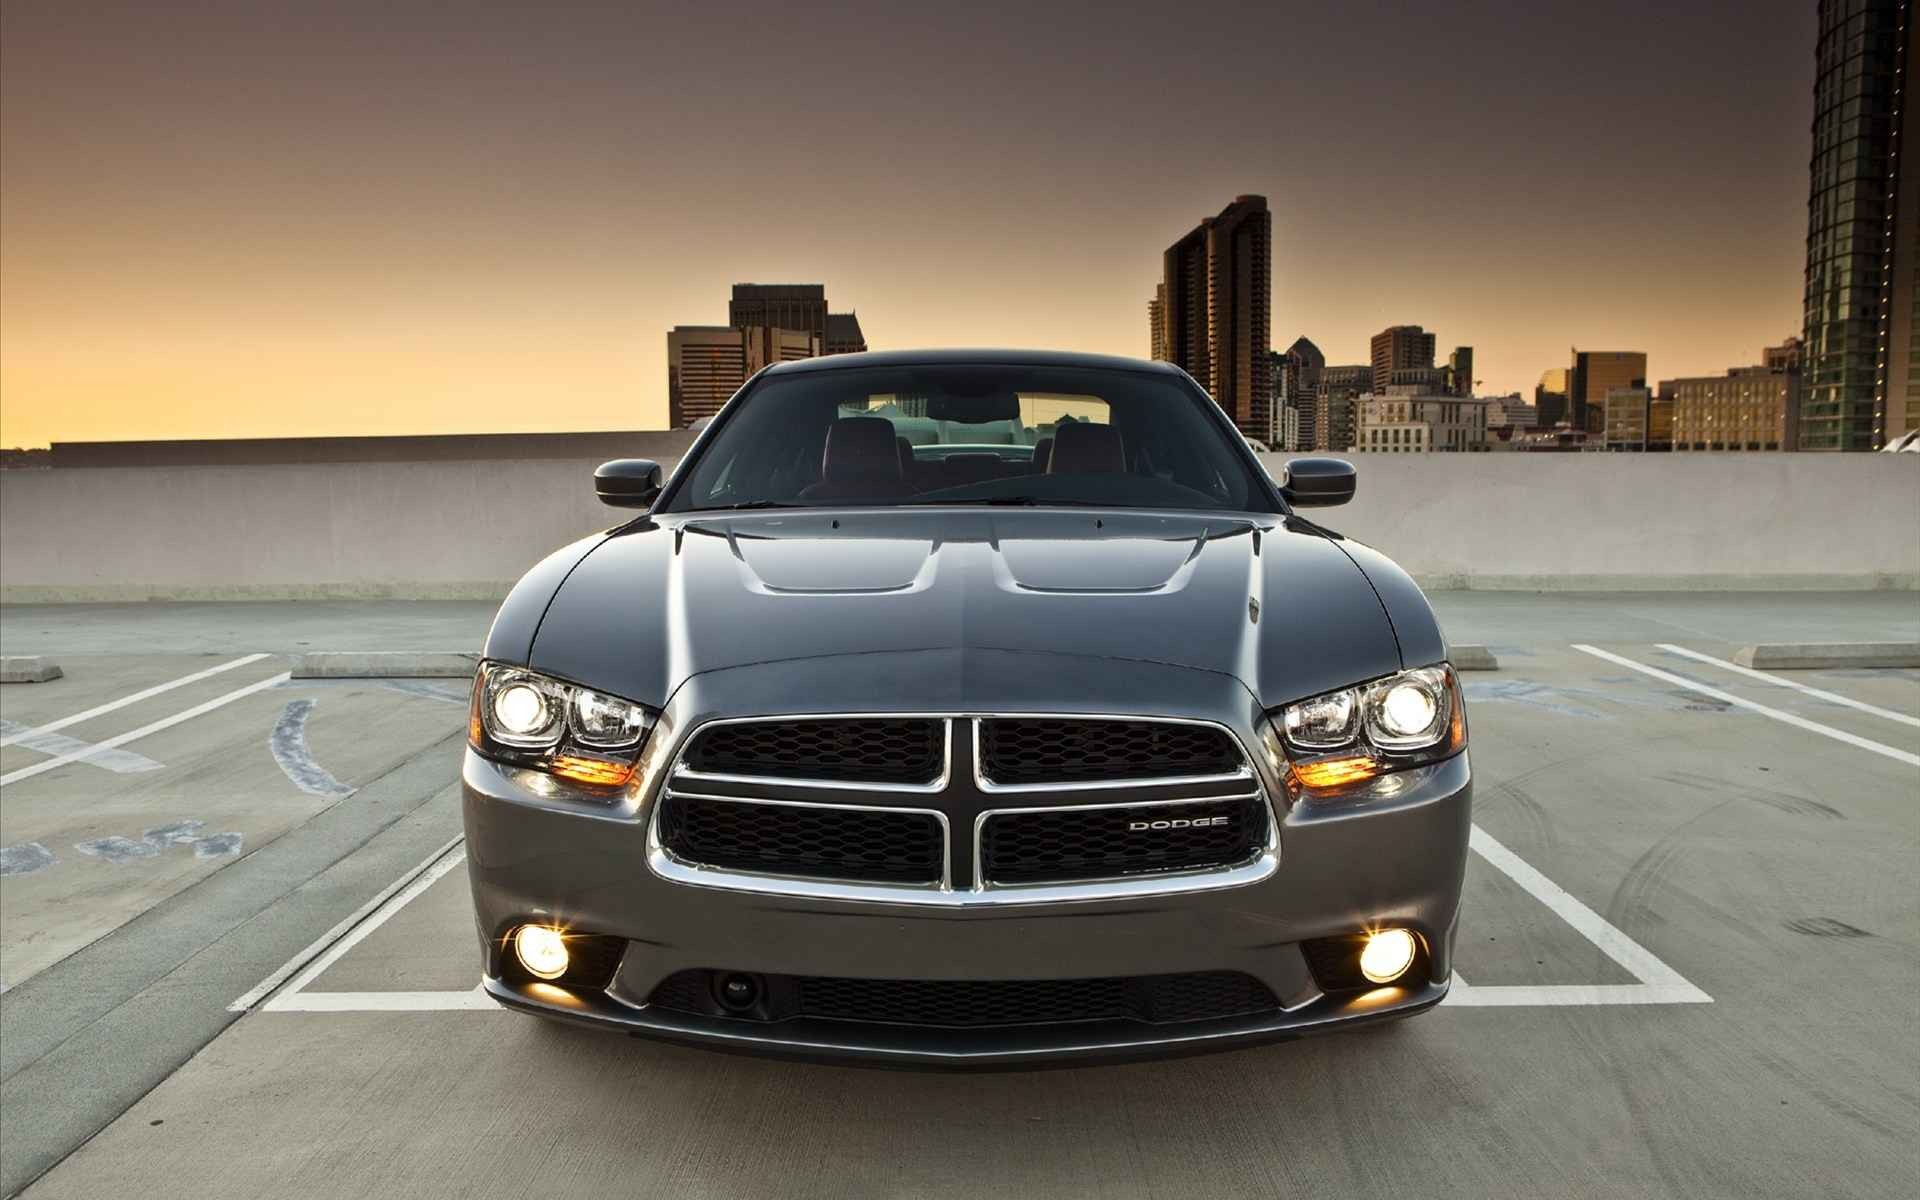 General 1920x1200 frontal view car Dodge vehicle silver cars urban Dodge Charger Stellantis American cars muscle cars